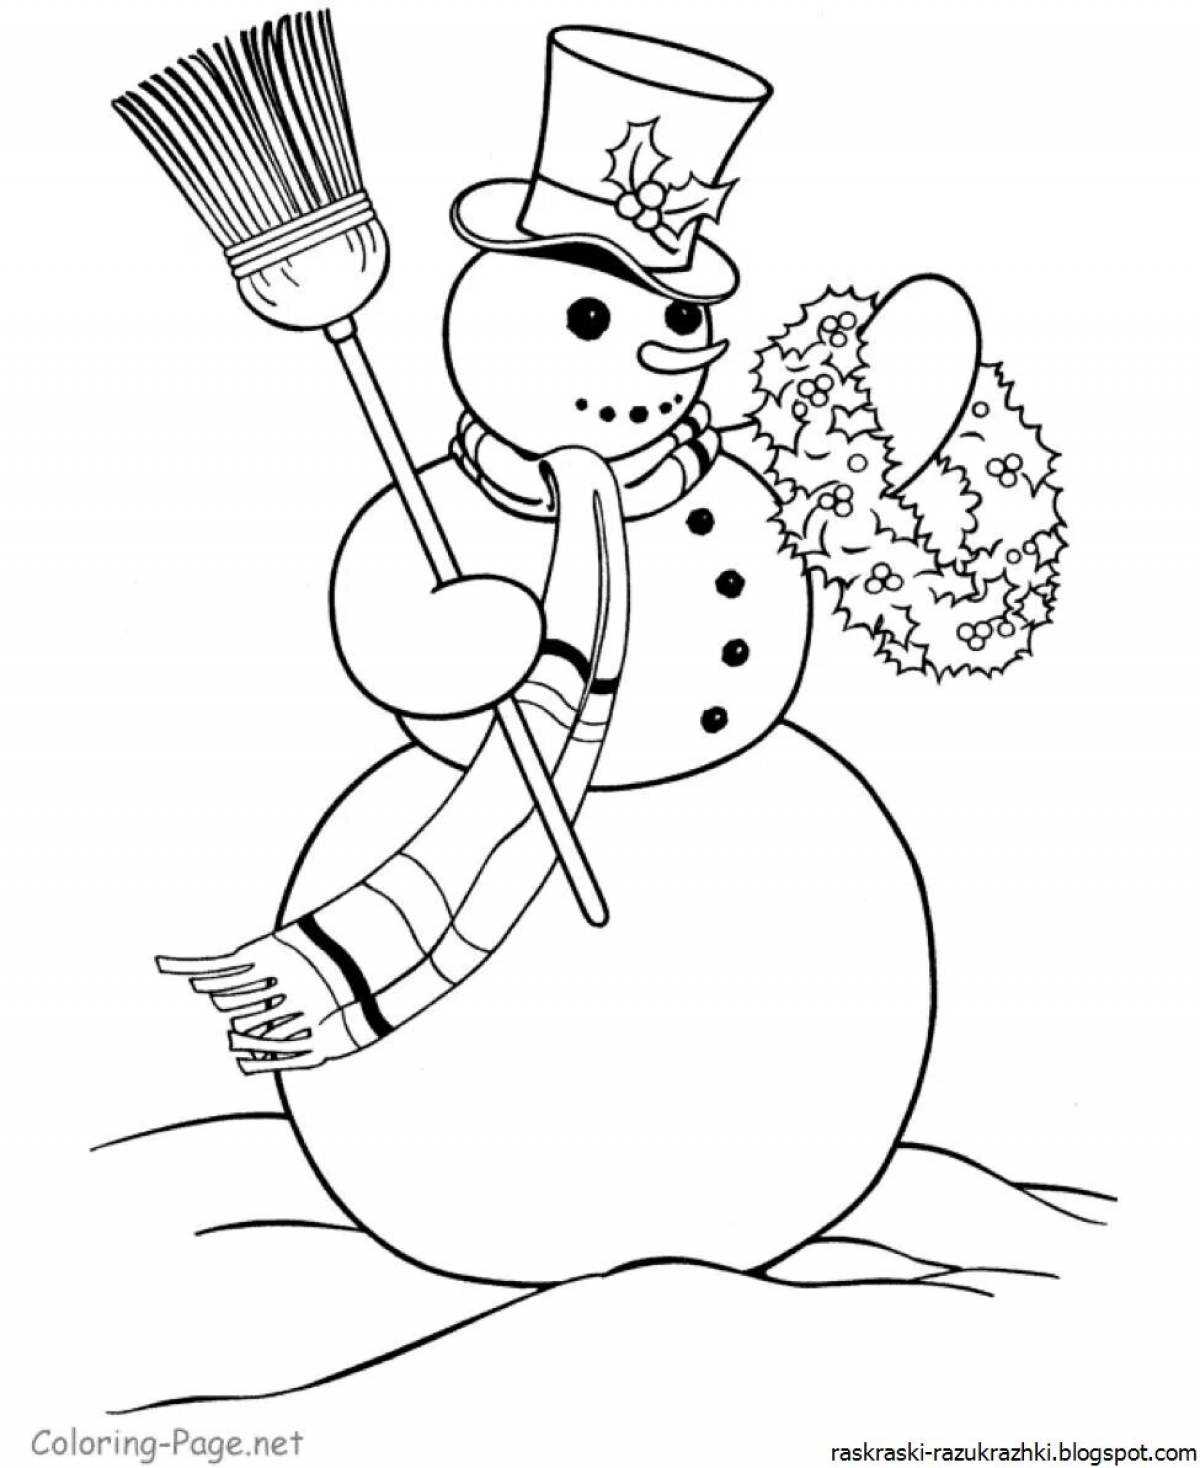 Snowman drawing for kids #2